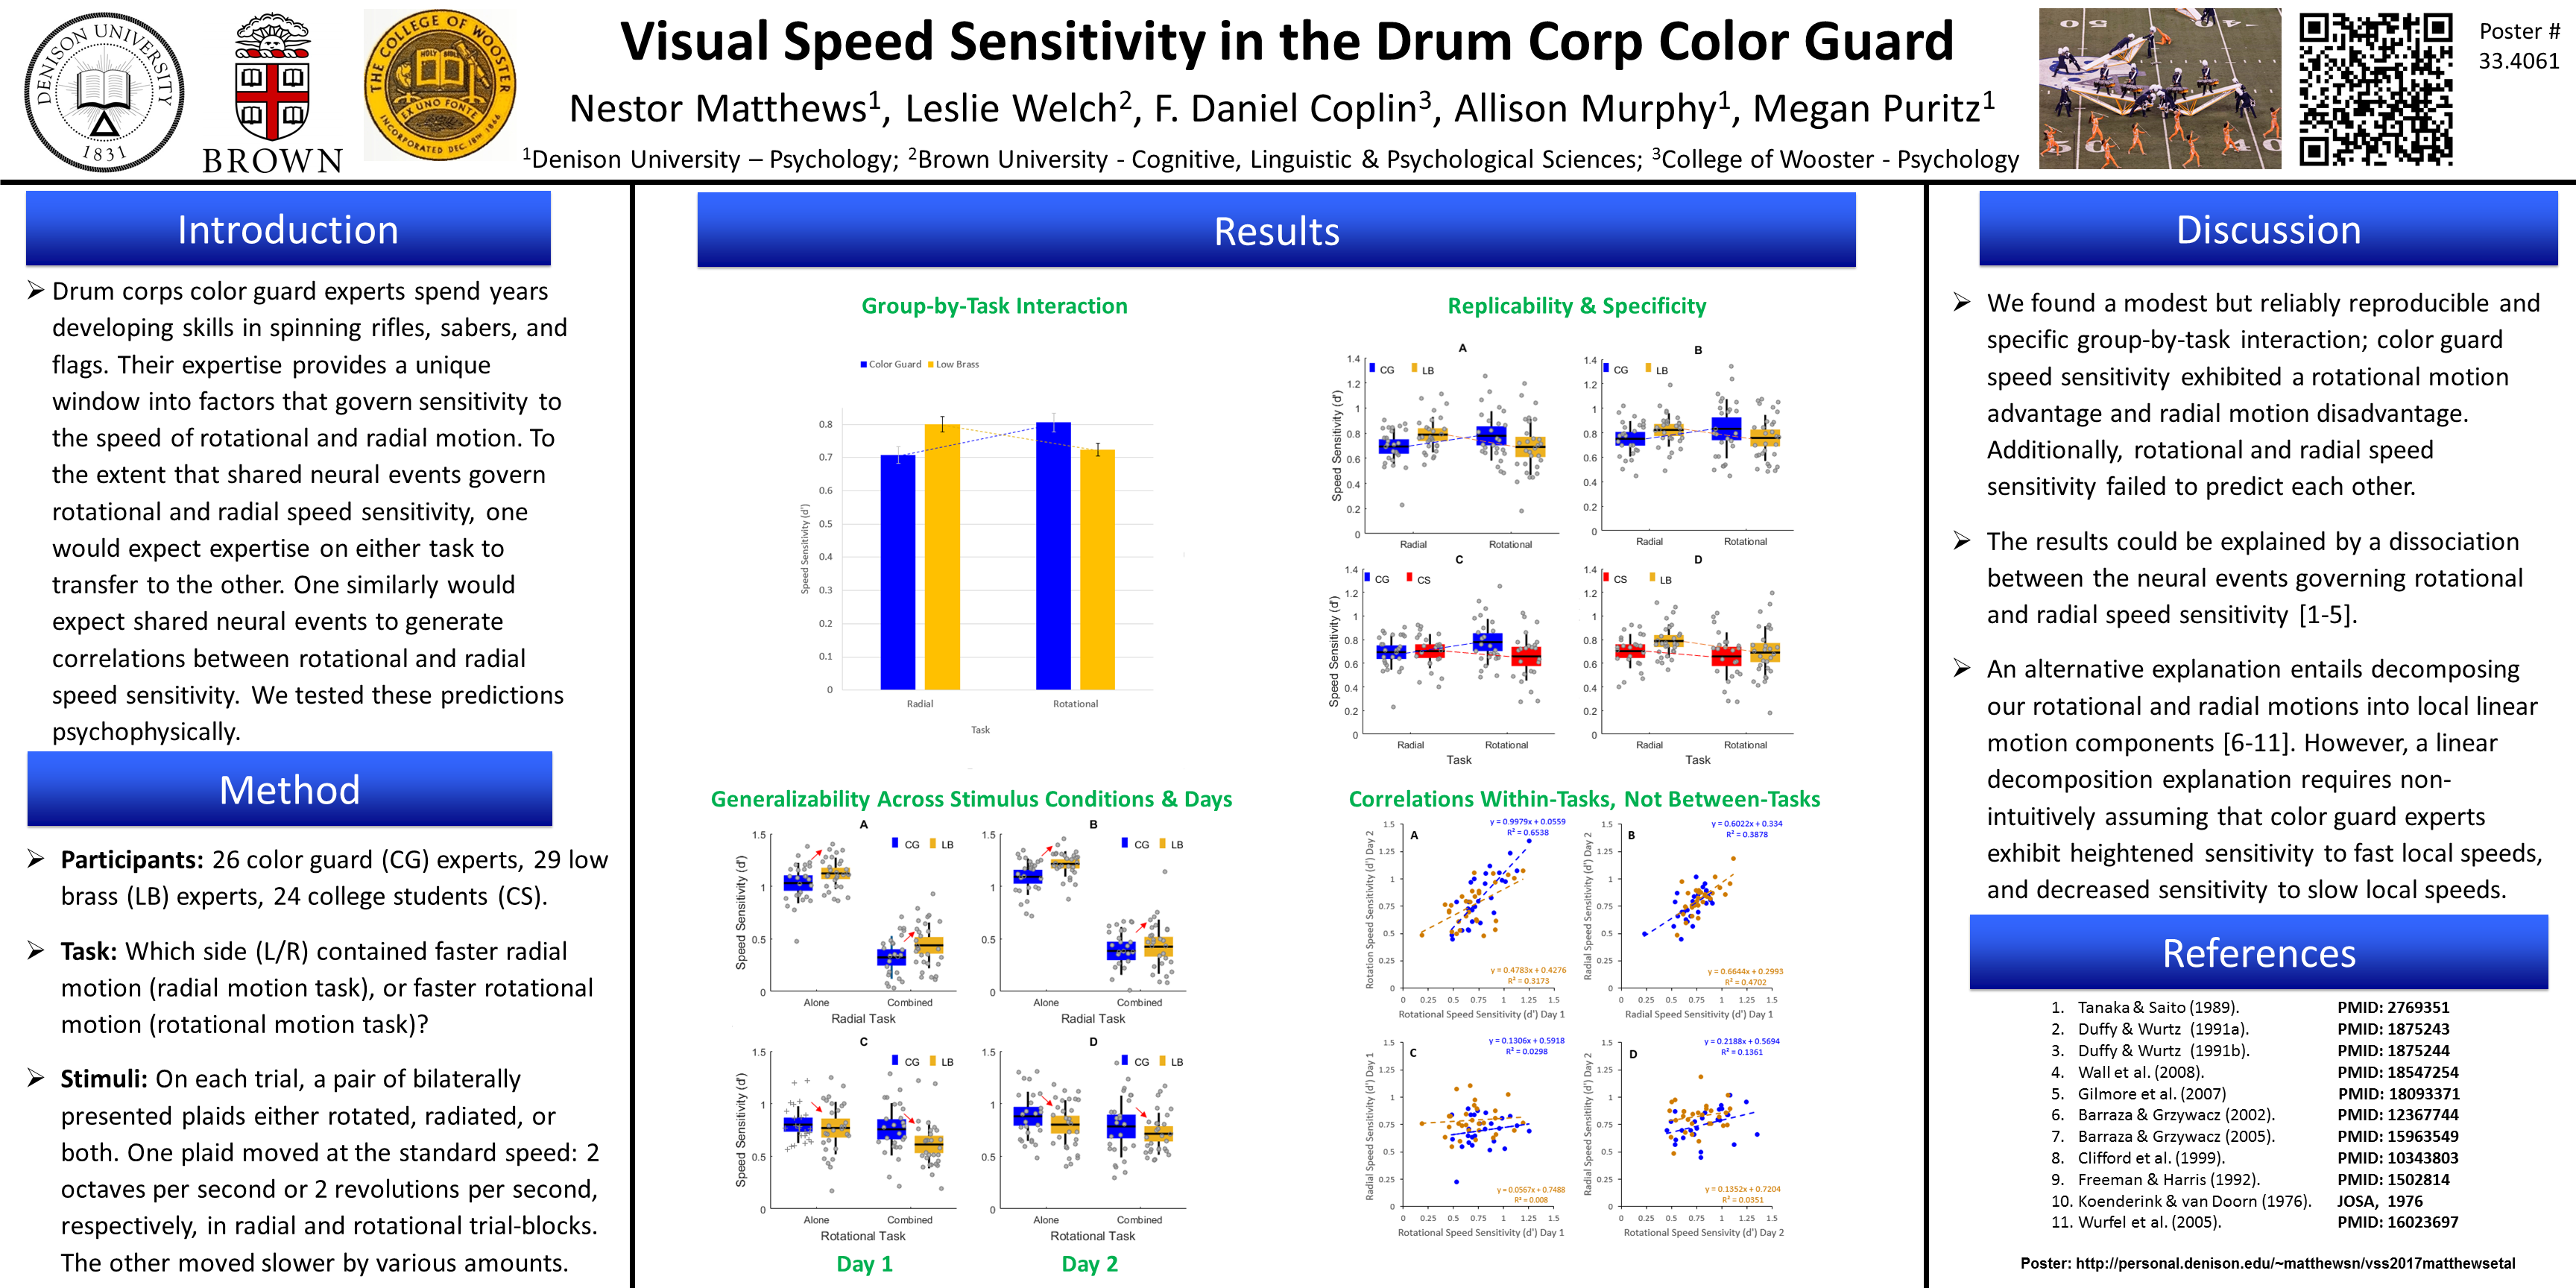 Visual Speed Sensitivity in the Drum Corps Color Guard, VSS 2017